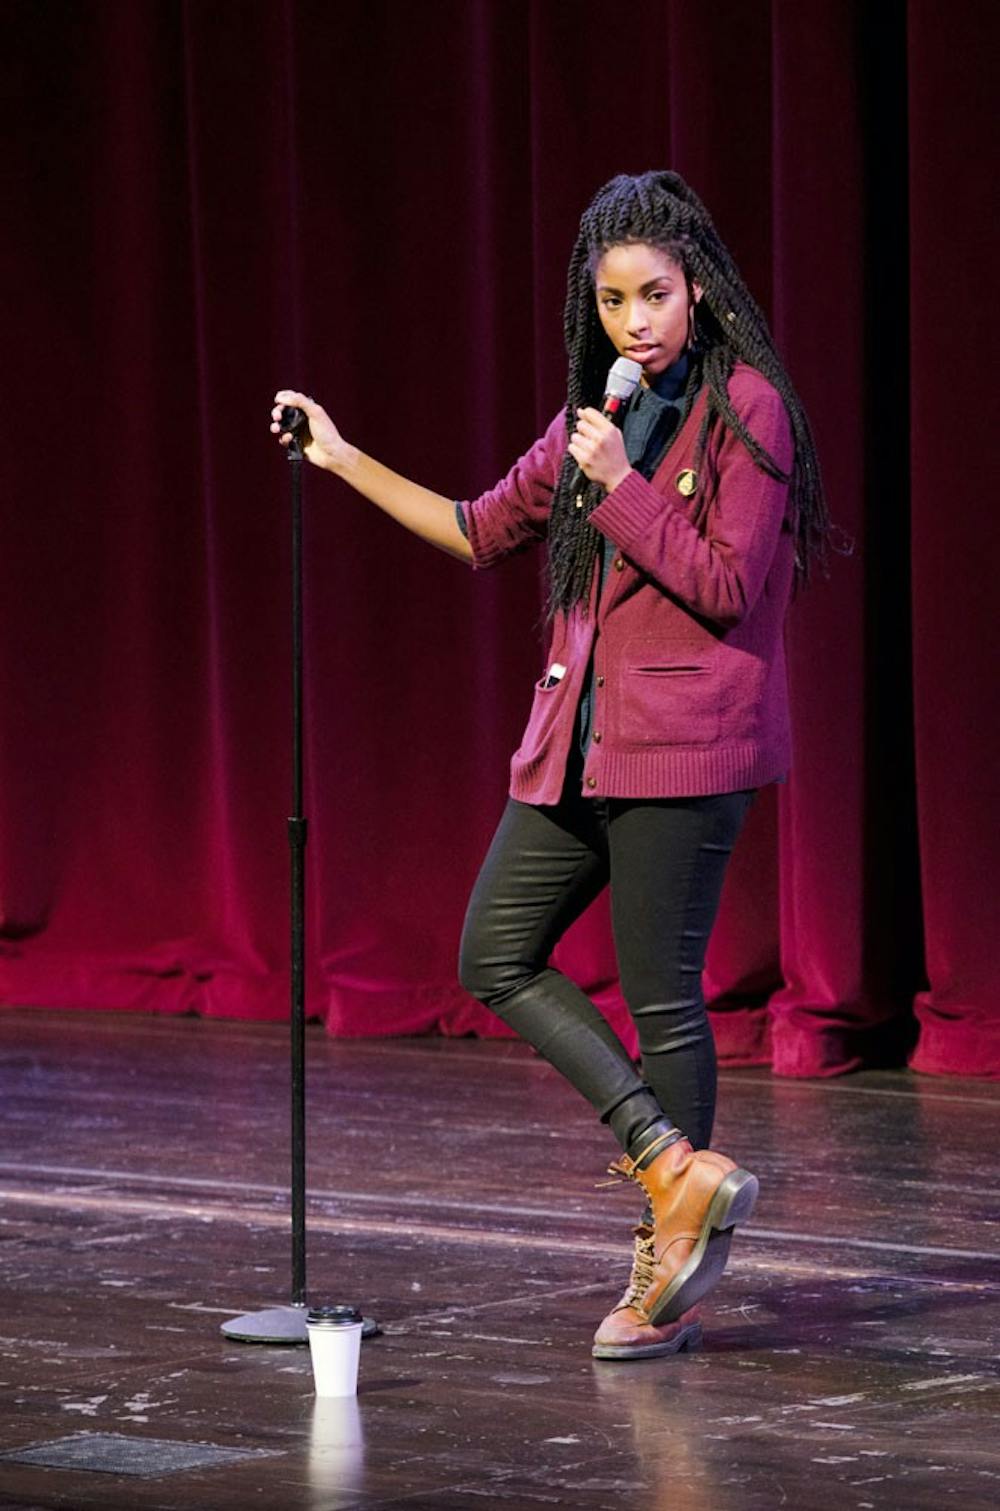 <p>Jessica Williams of <em>The Daily Show </em>fame takes the stage in the Center For the Arts, giving a comedic lecture as part of the Student Association's annual Comedy Series. </p>